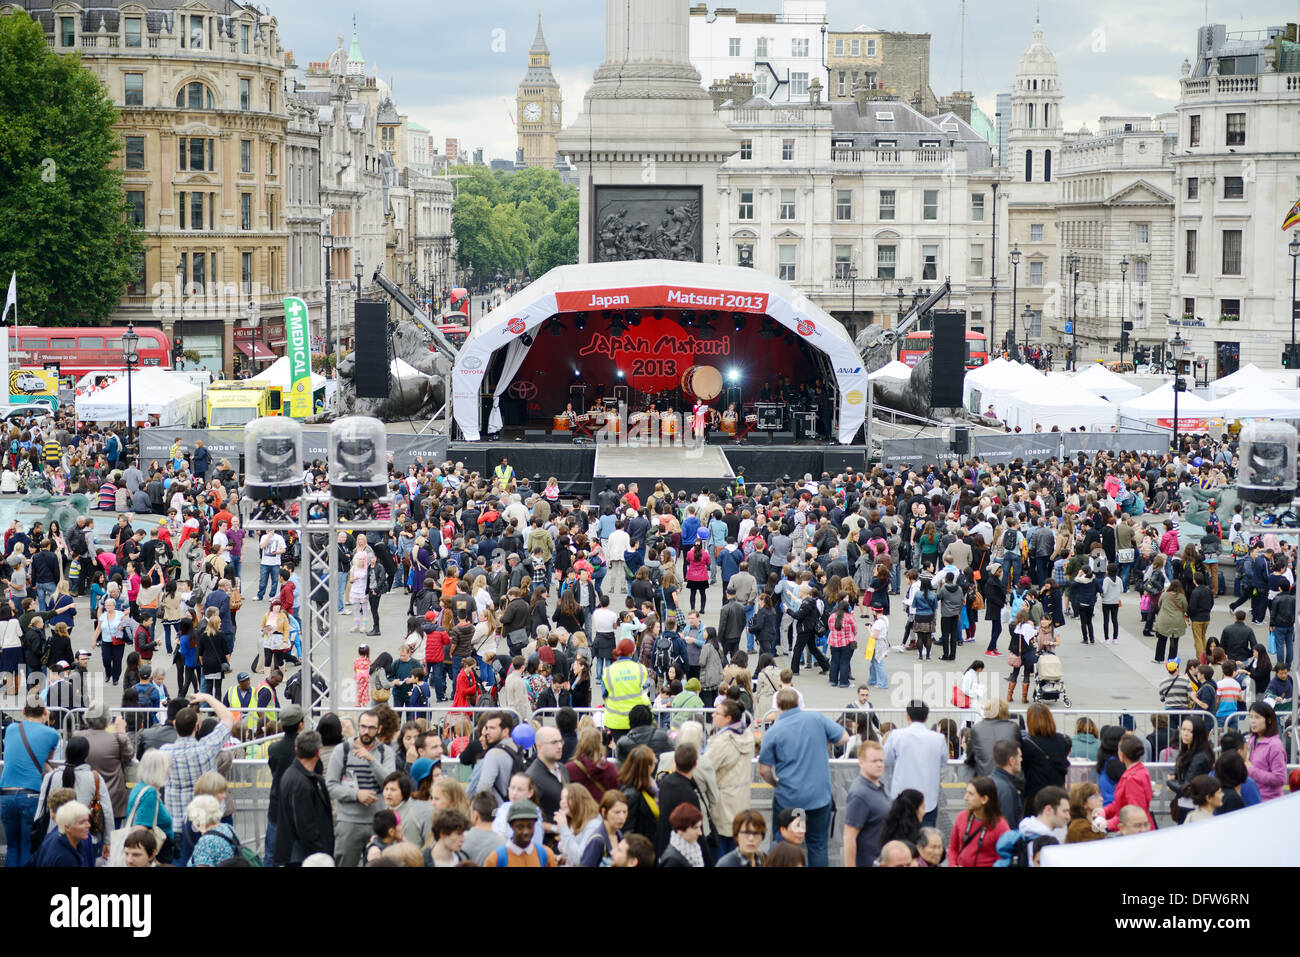 Japan matsuri festival in London. Crowds of people and stage with Big Ben. Saturday 5th October 2013 Stock Photo